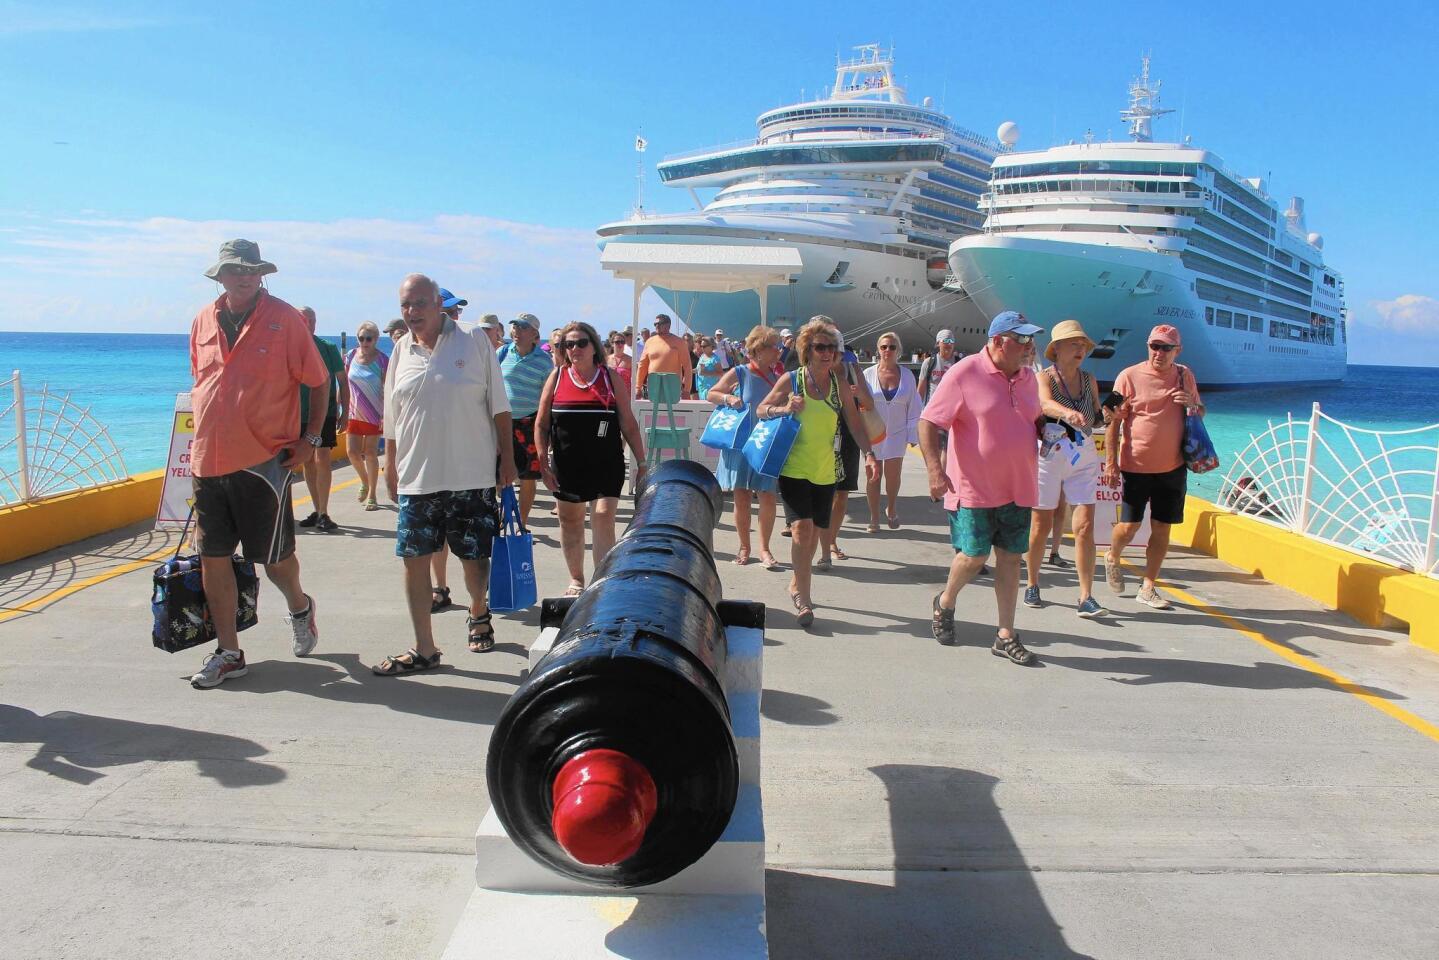 Passengers, many beach-bound and none discouraged by the cannon, disembark from Princess Cruises’ Crown Princess, left, and Silversea’s Silver Muse at Grand Turk, hit by hurricanes Irma and Maria last year.